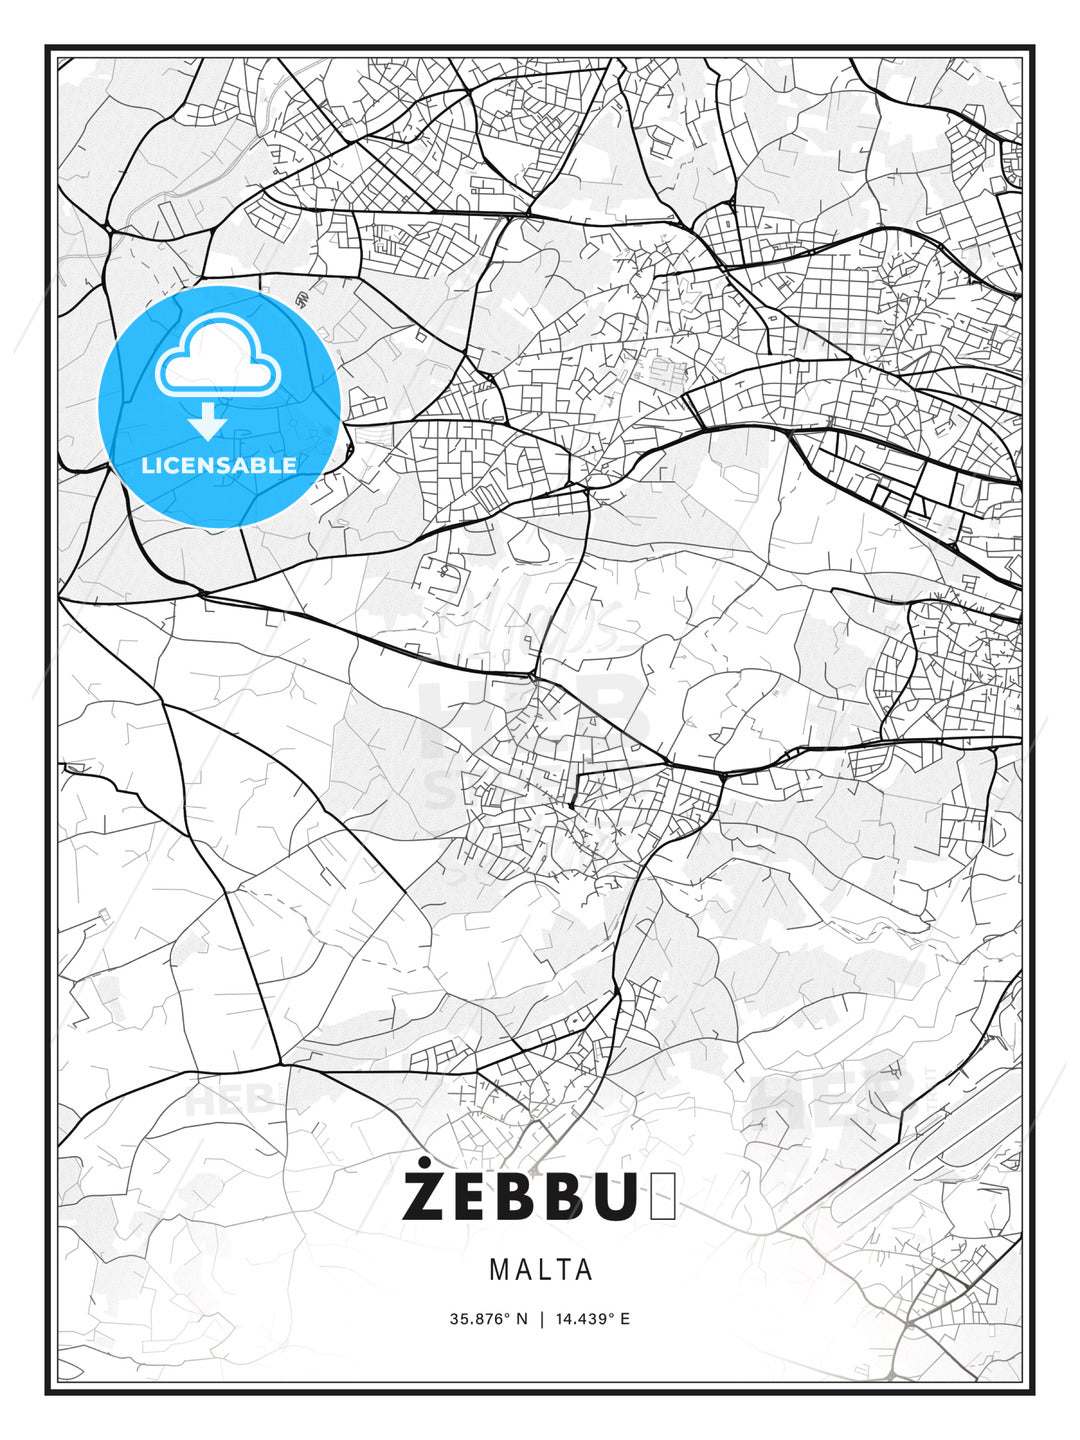 Żebbuġ, Malta, Modern Print Template in Various Formats - HEBSTREITS Sketches